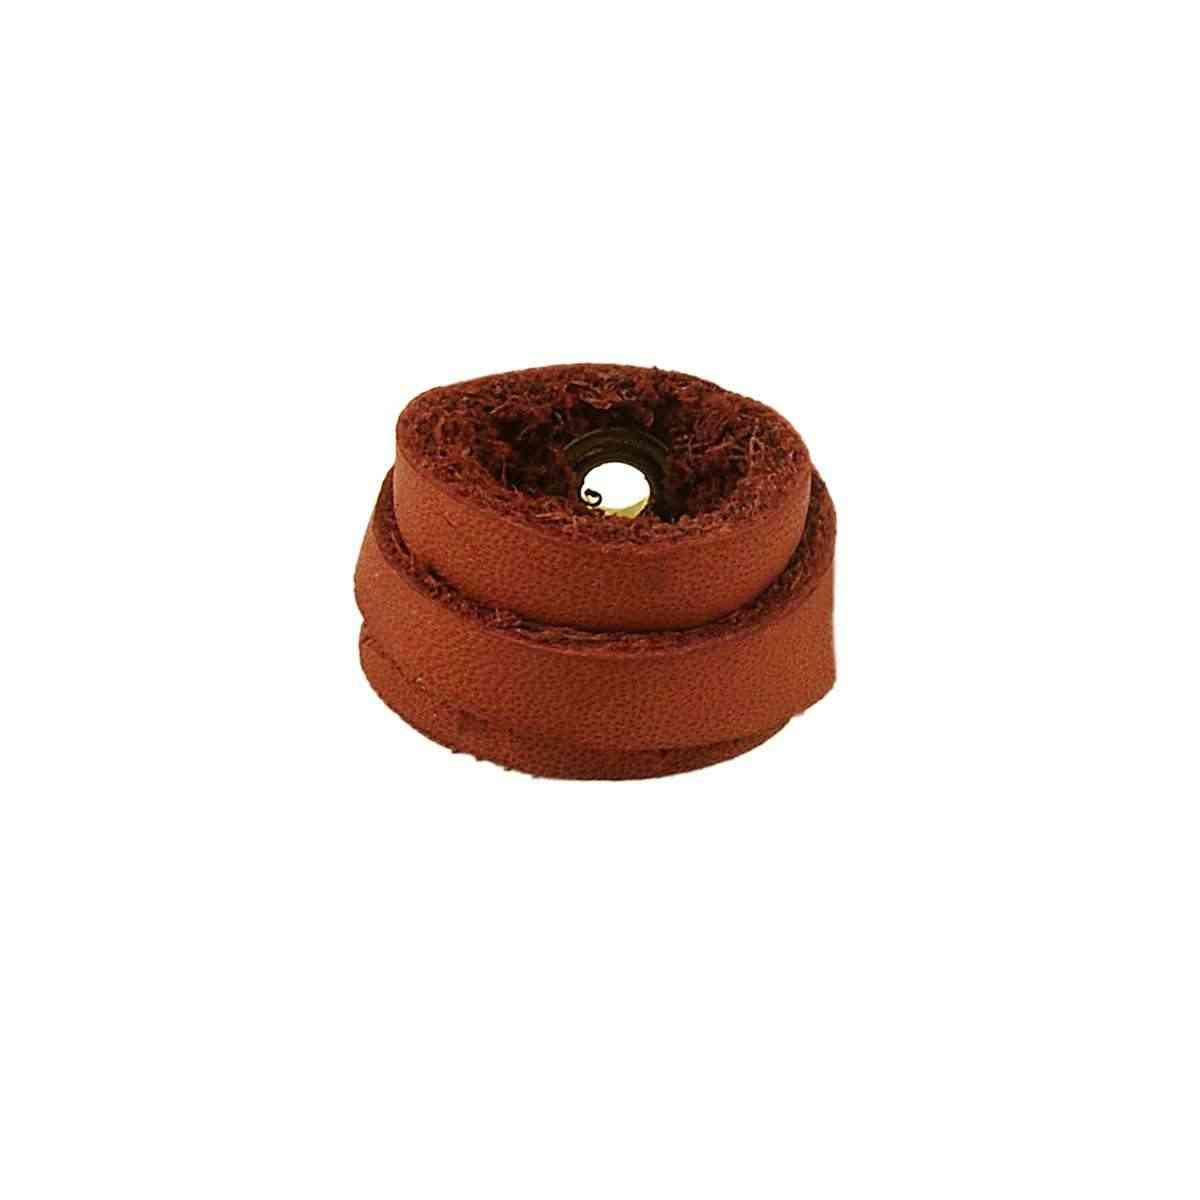 Leather Ring Brown Back